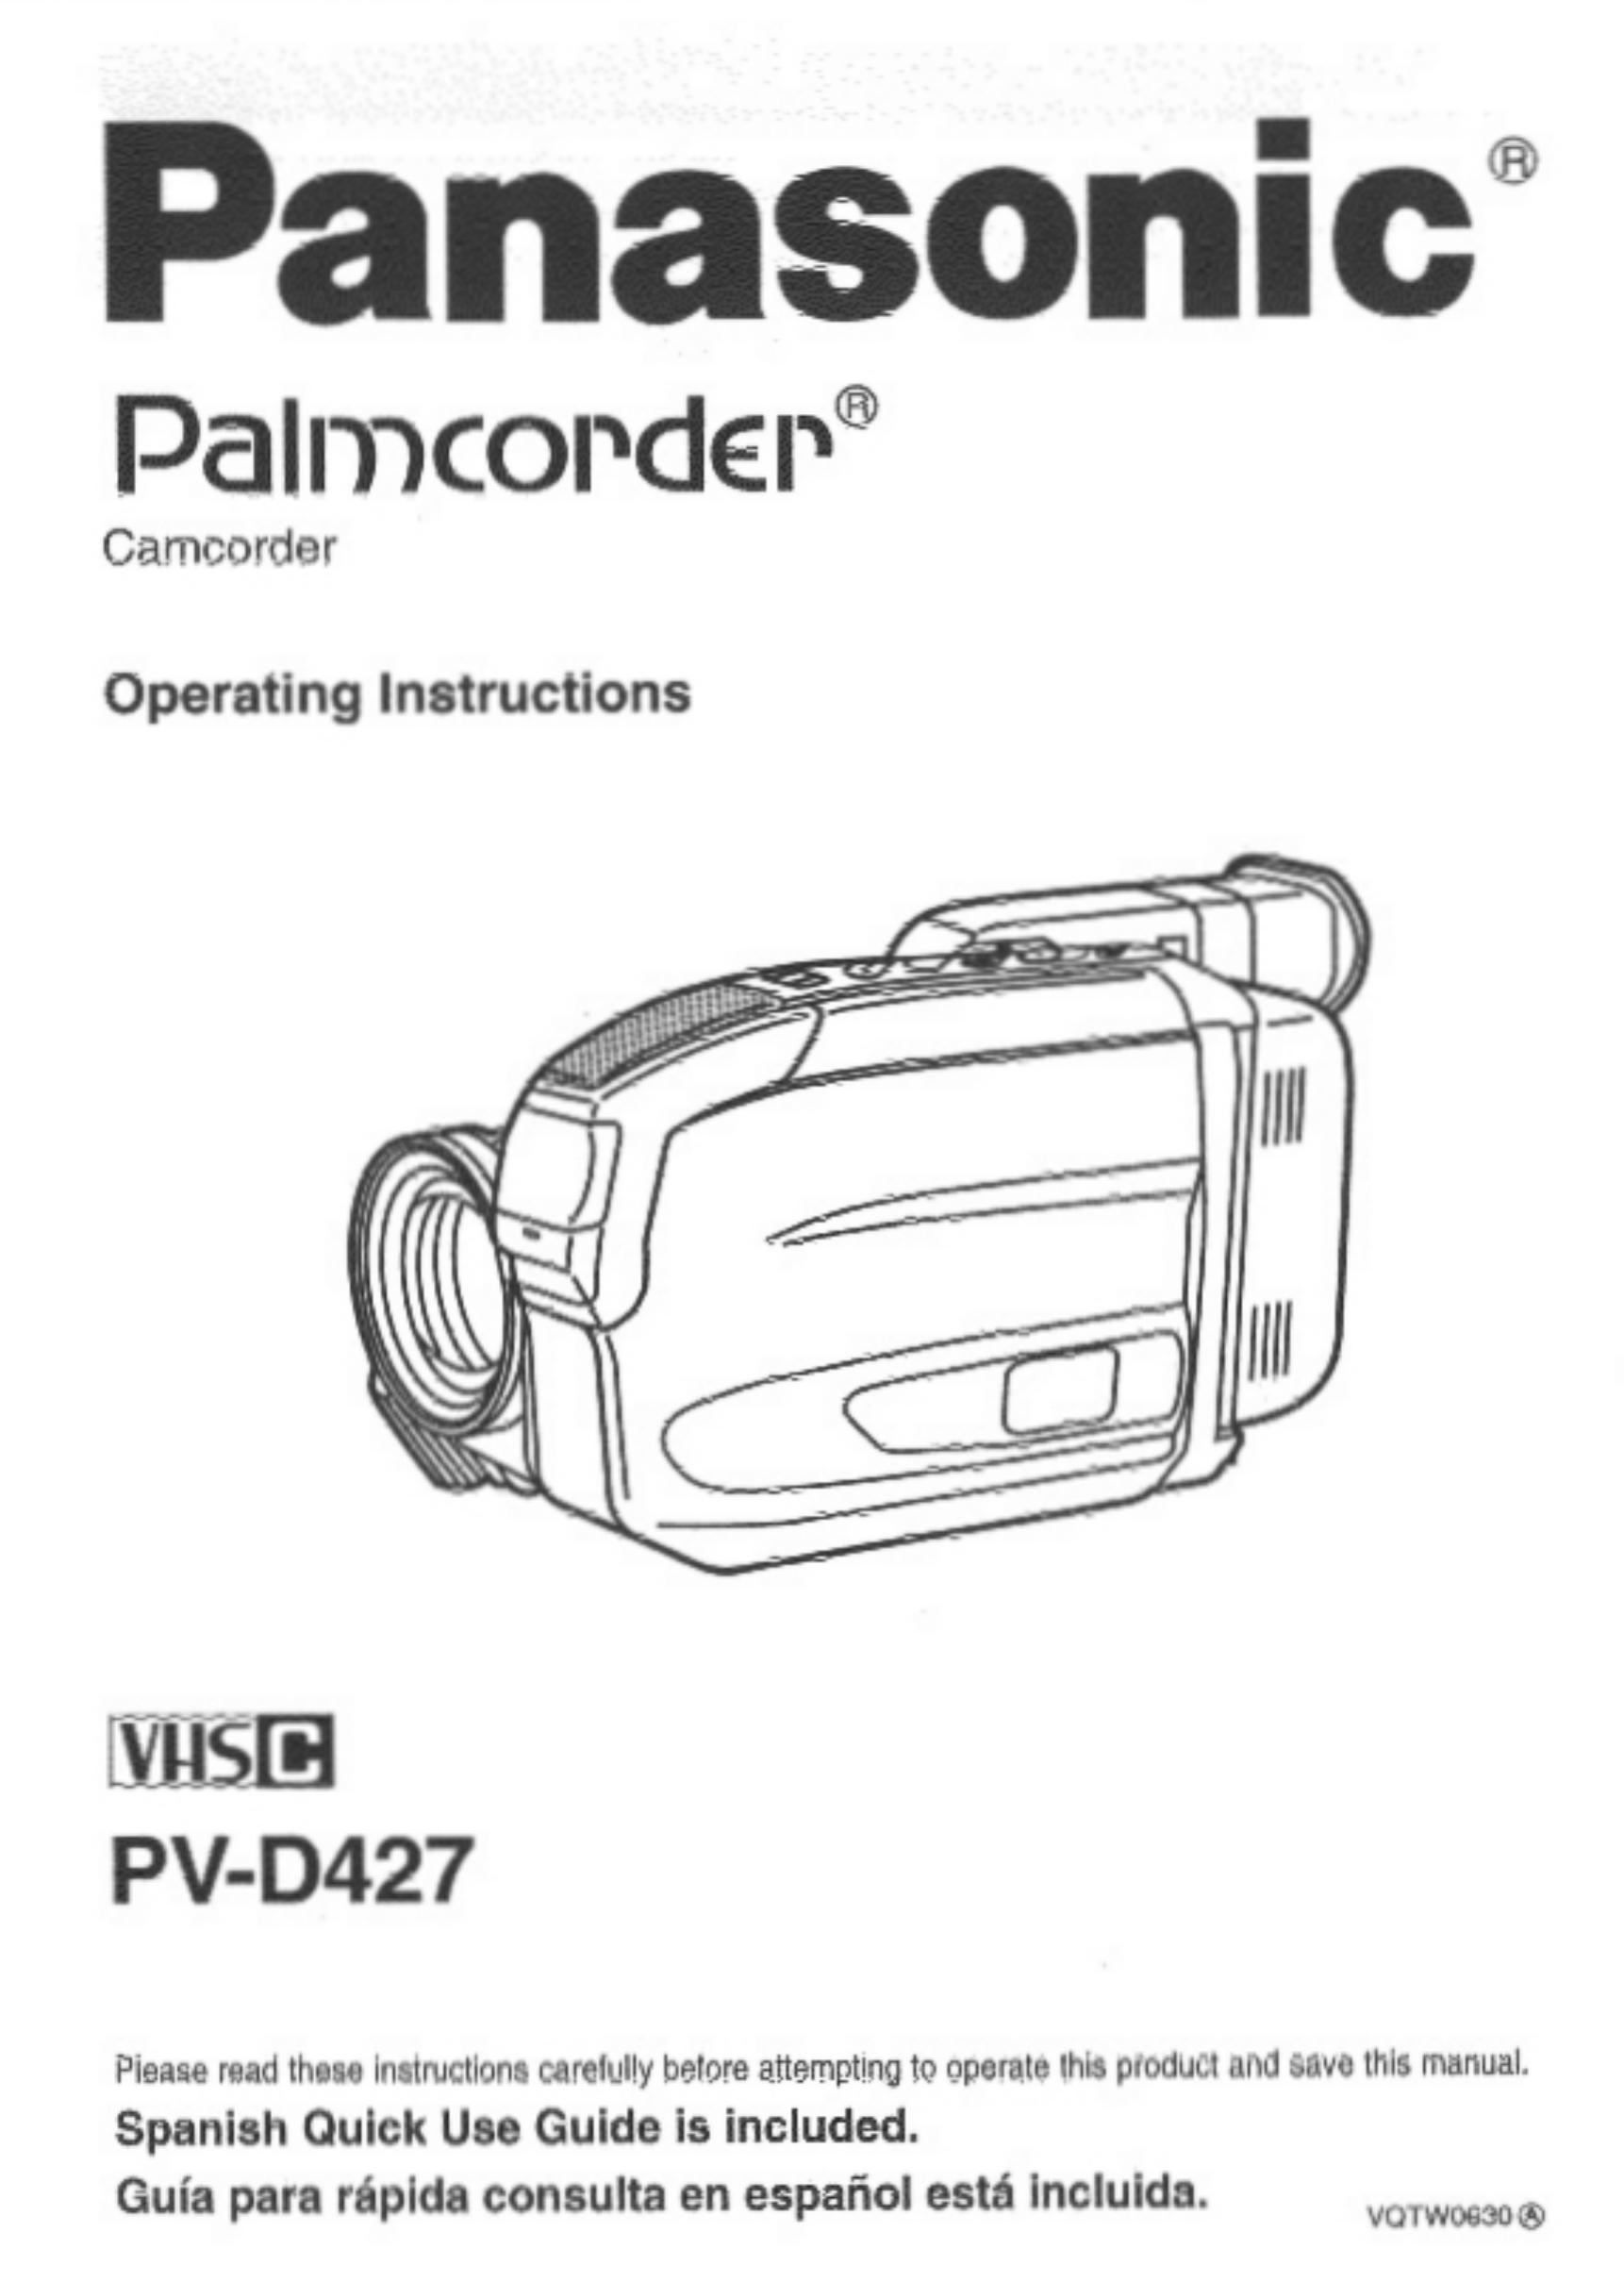 Panasonic PV-D427 Camcorder Accessories User Manual